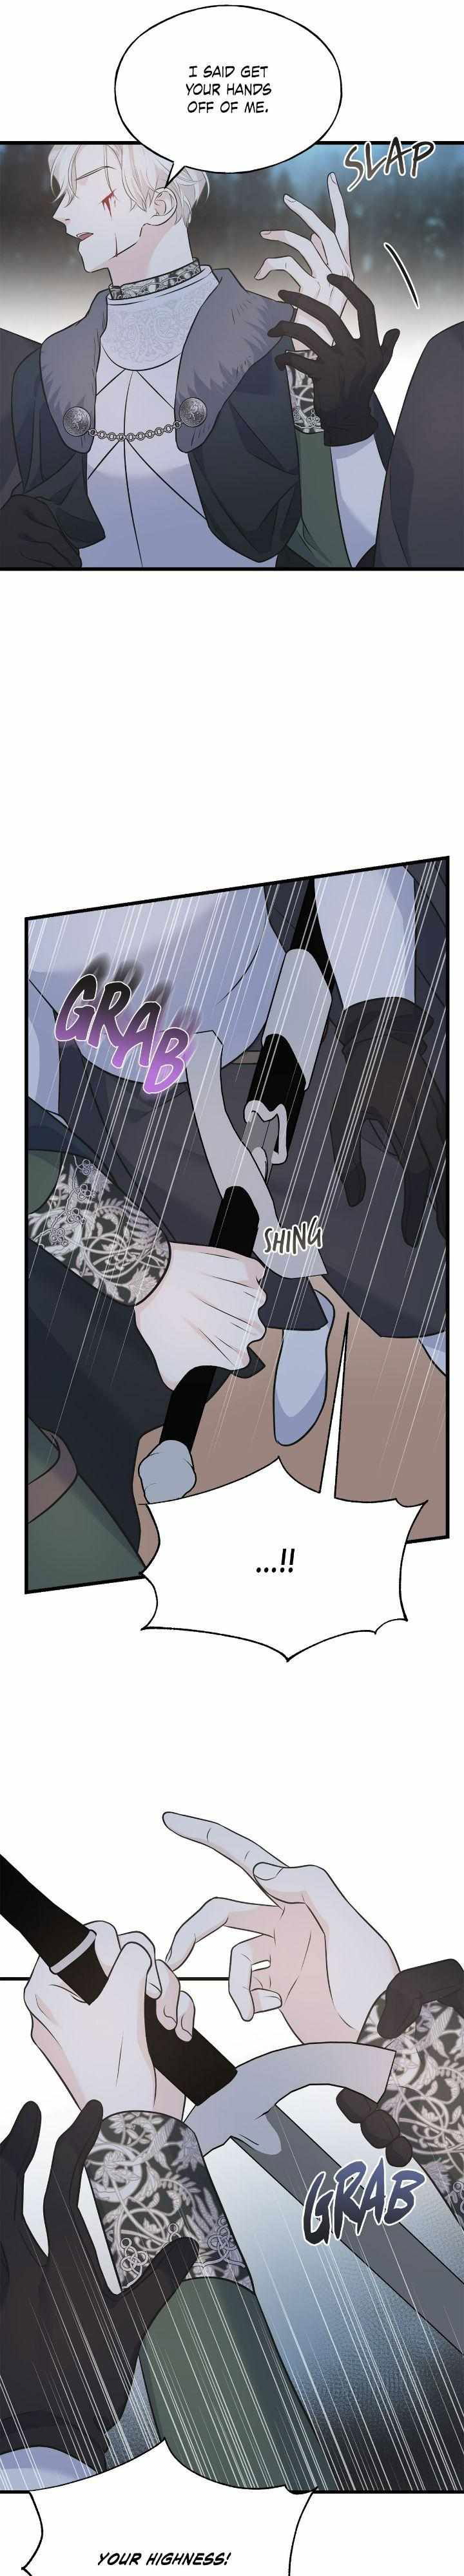 Crows Like Shiny Things Chapter 99 page 9